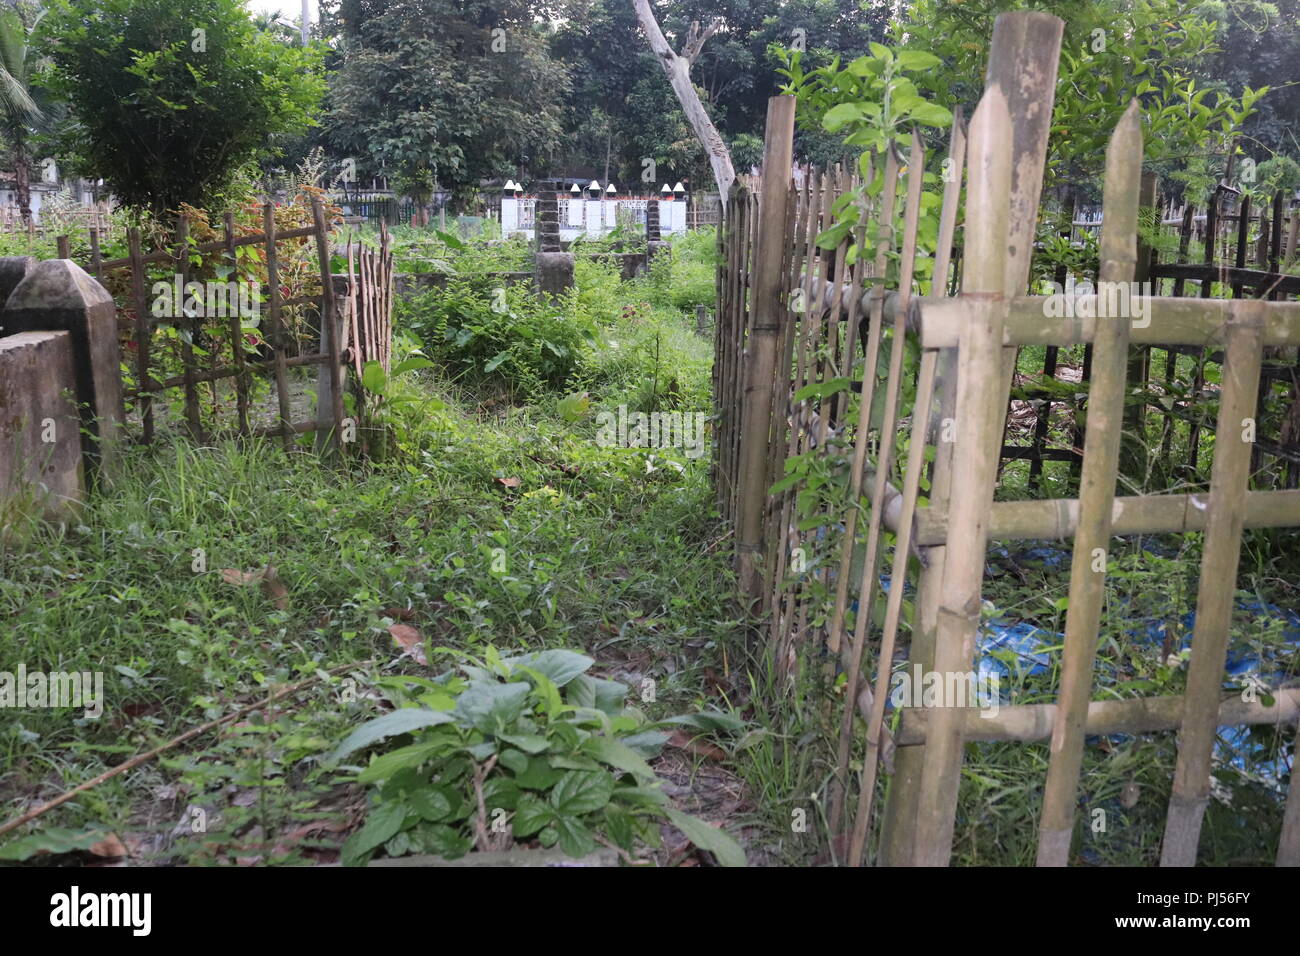 Graves at Muslim cemetery.Muslim graveyard with Surrounded by bamboo fencing.New Bangladesh Graveyard with Bamboo fencing. Stock Photo